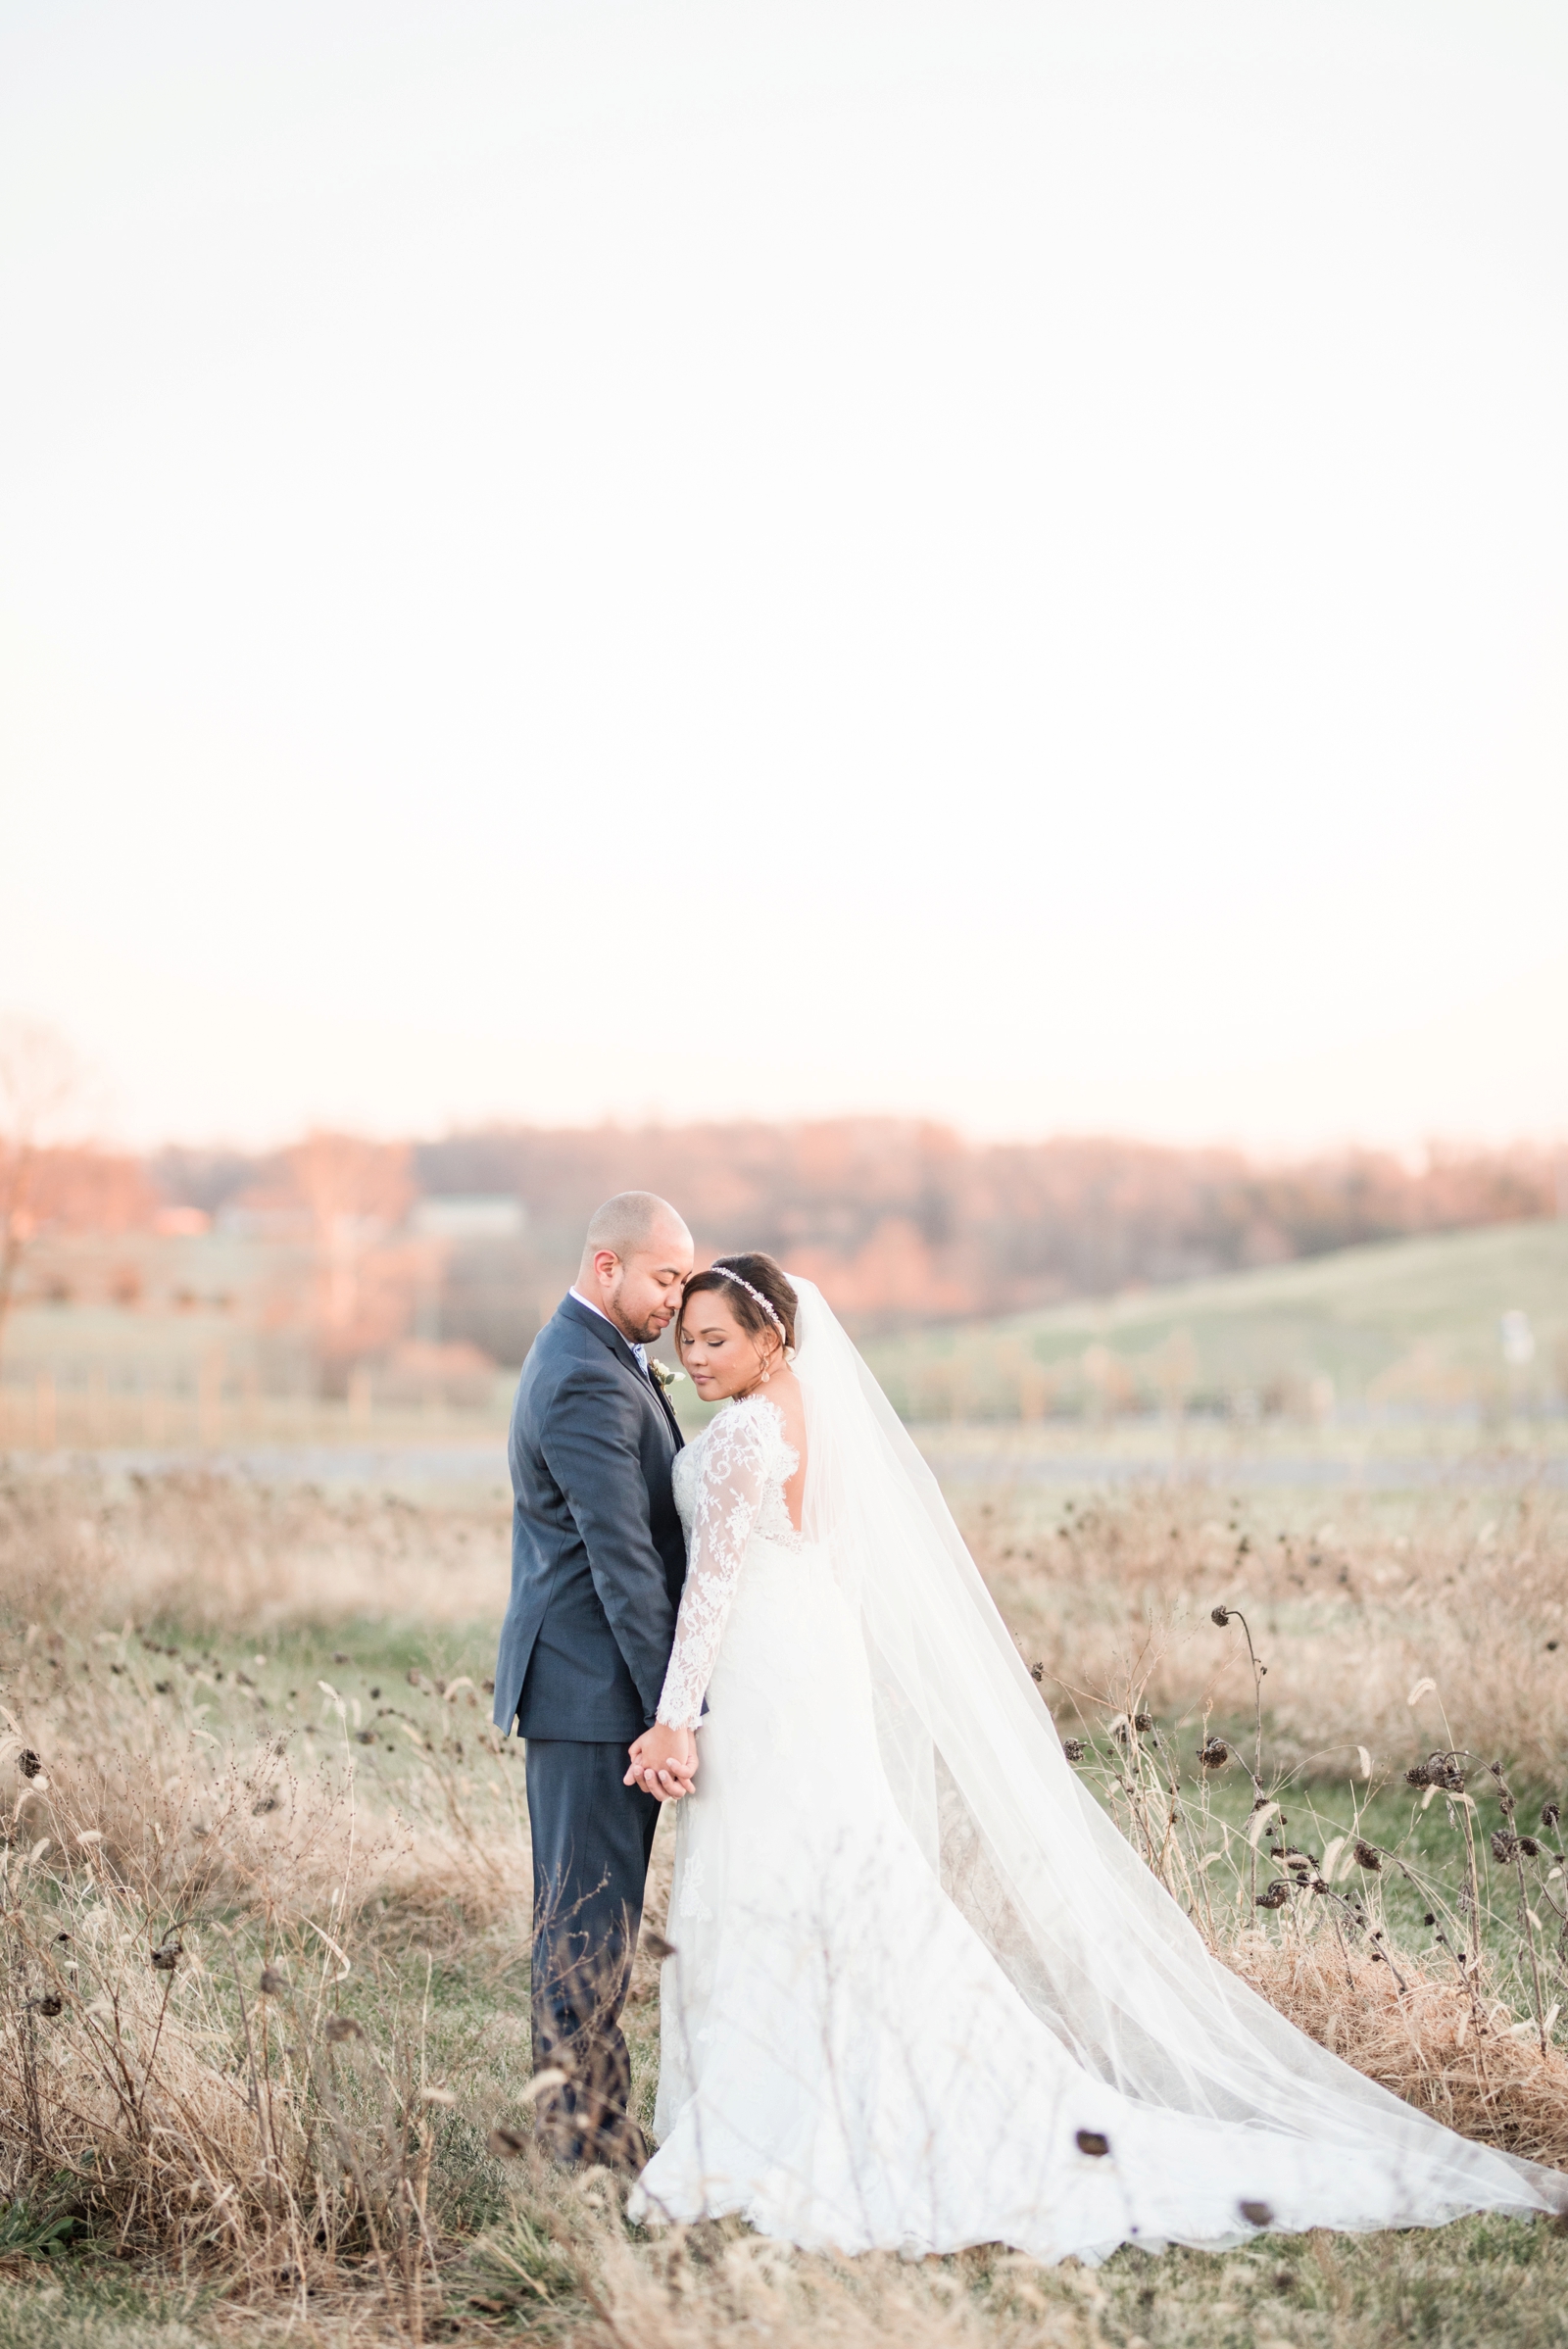 early mountain vineyard charlottesville virginia winter wedding with neutral pastel colors